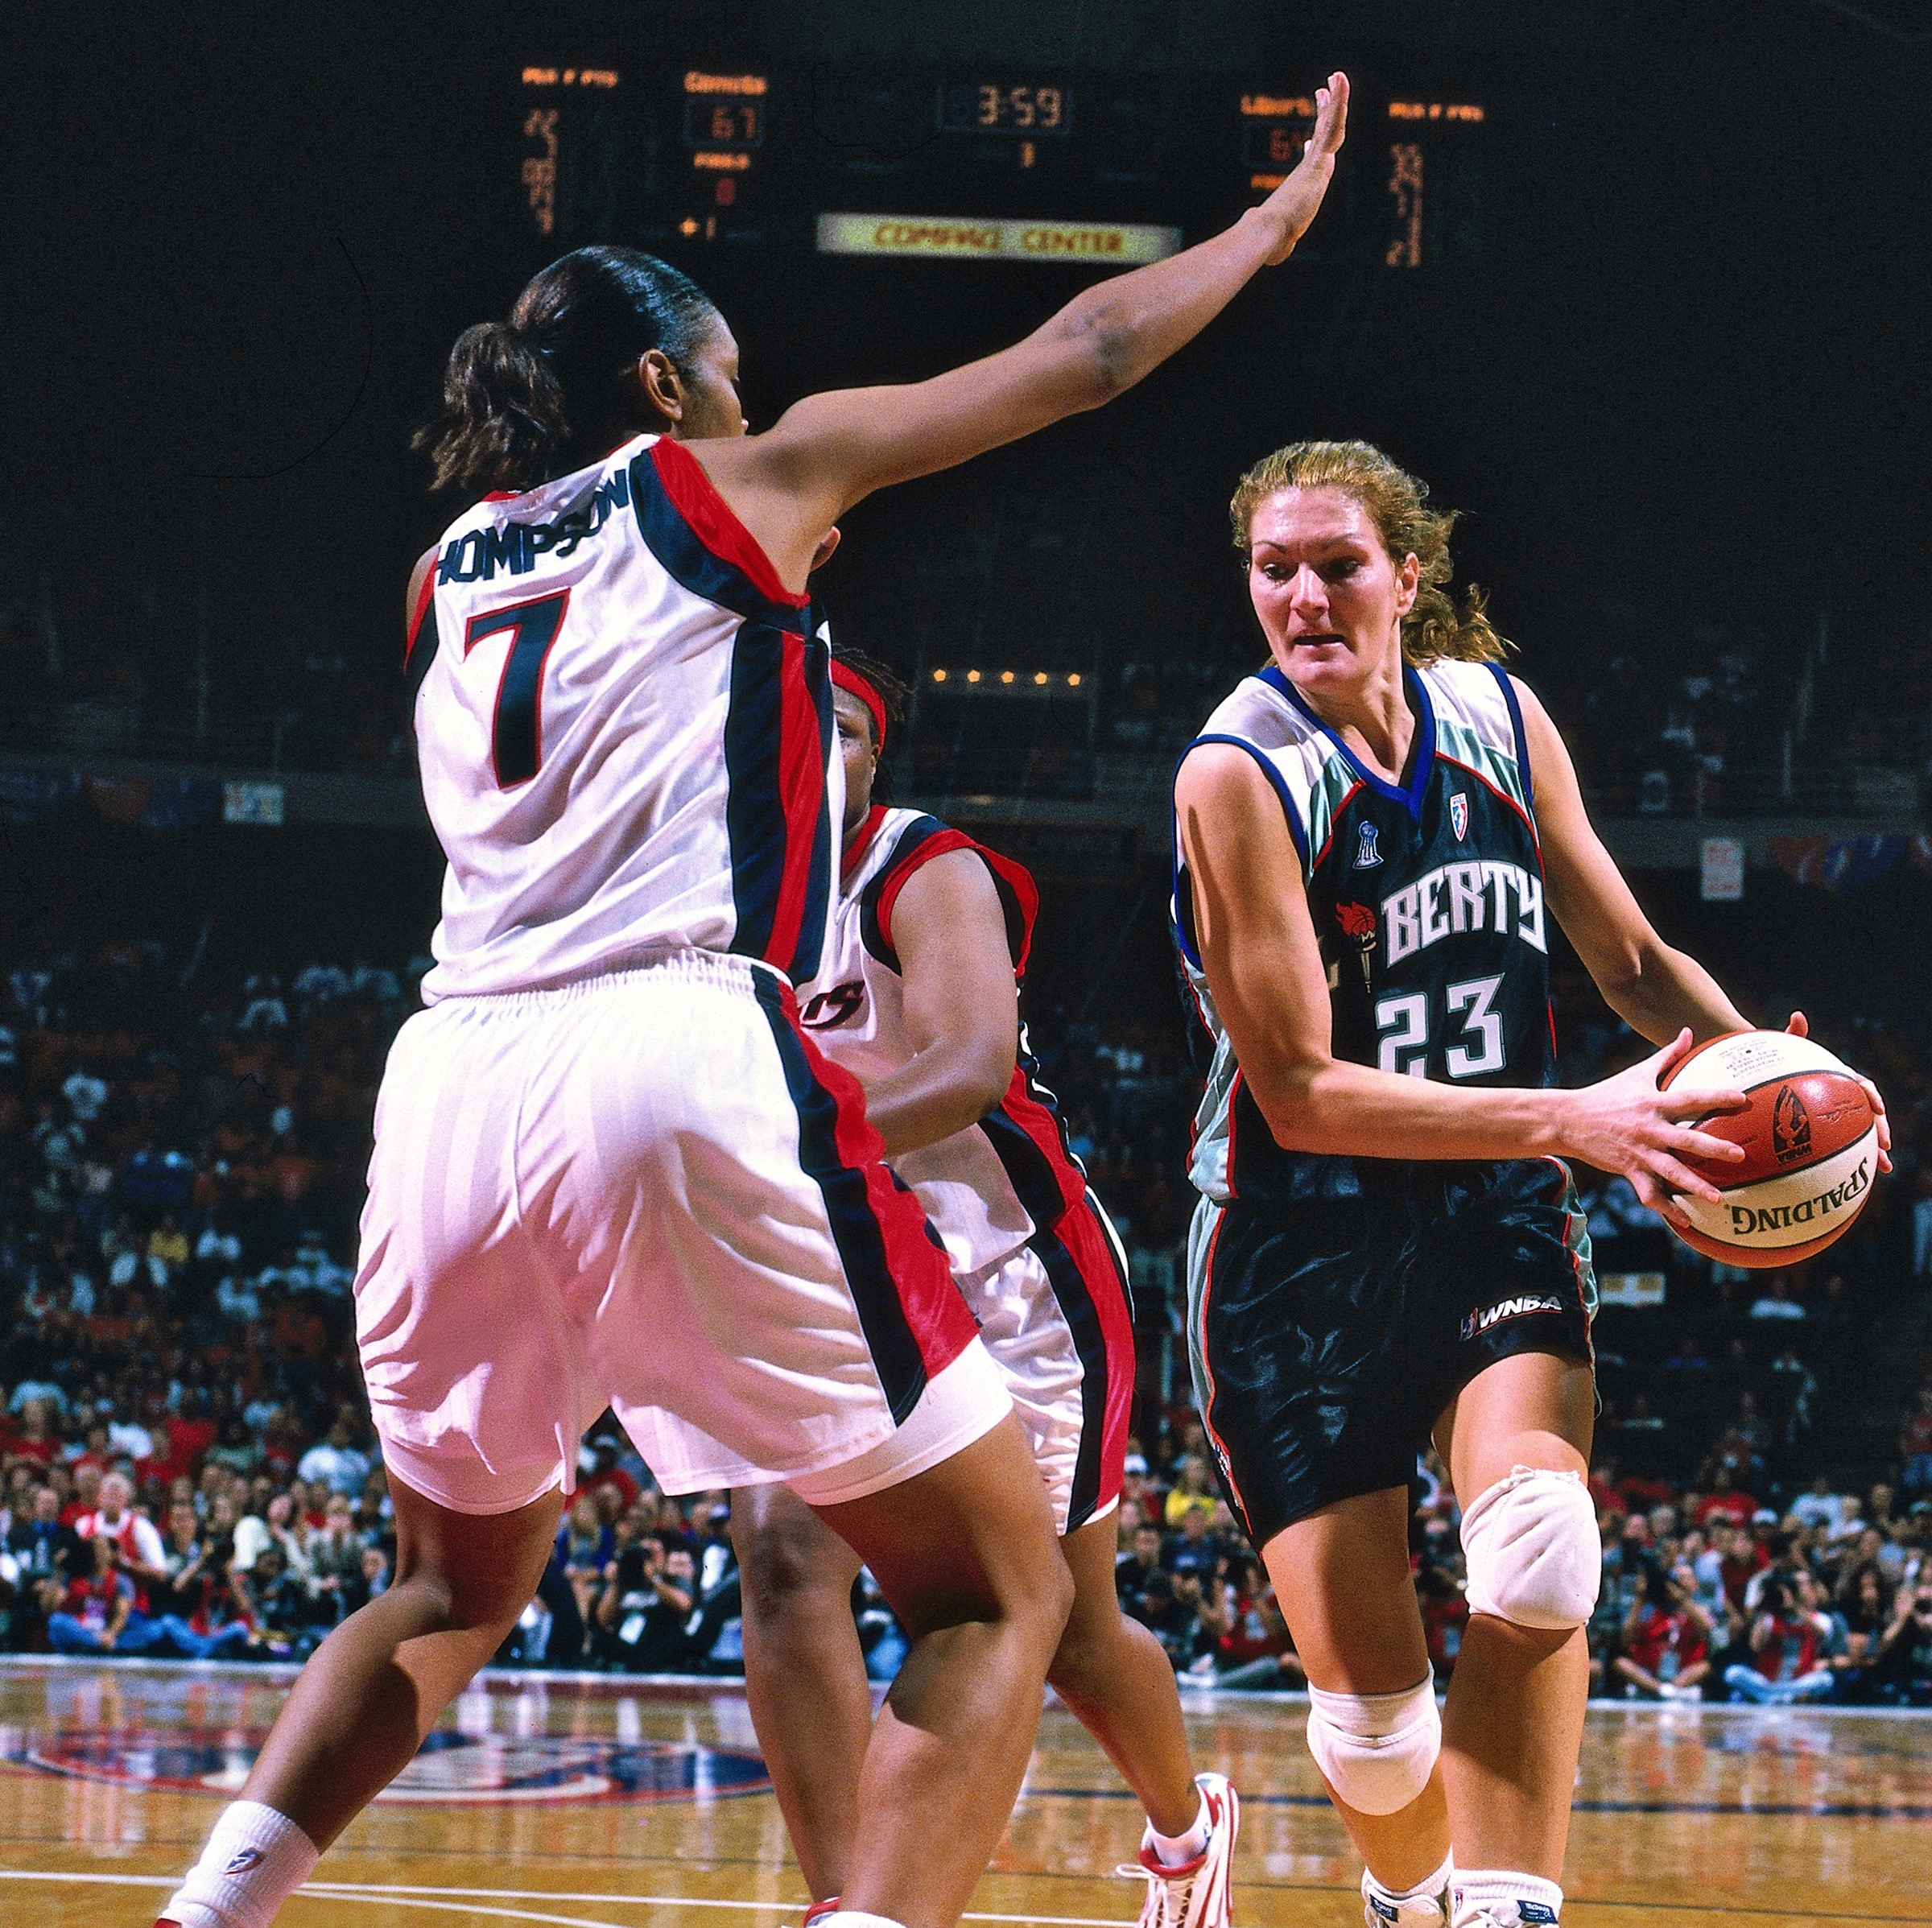 Woman in basketball uniform mid-game with basketball in hand on righthand part of screen.